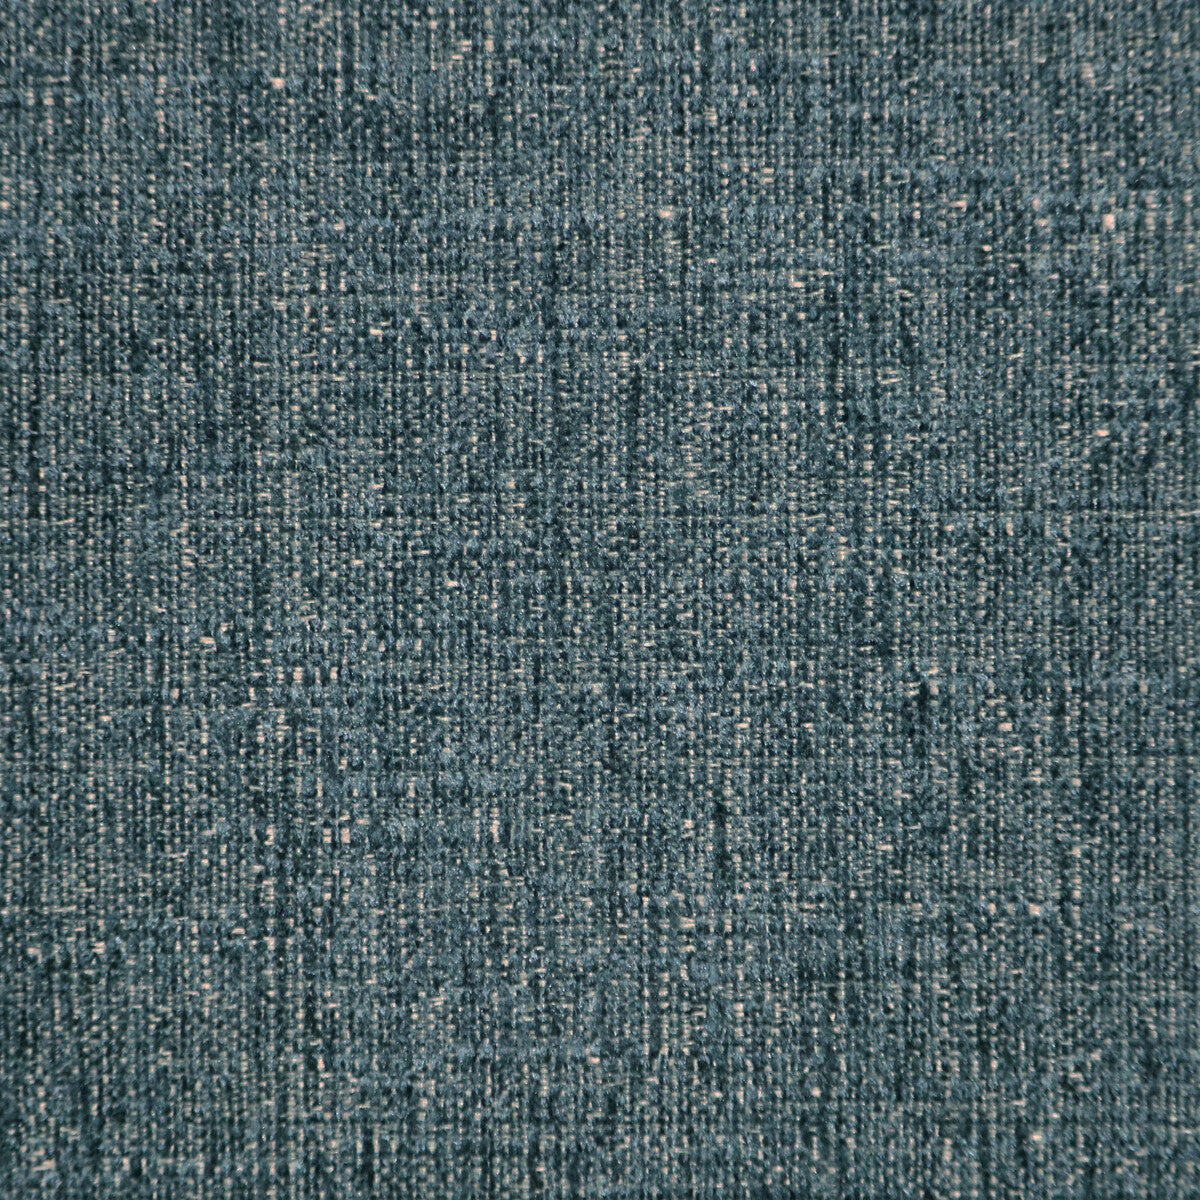 Kravet Contract fabric in 34636-35 color - pattern 34636.35.0 - by Kravet Contract in the Crypton Incase collection